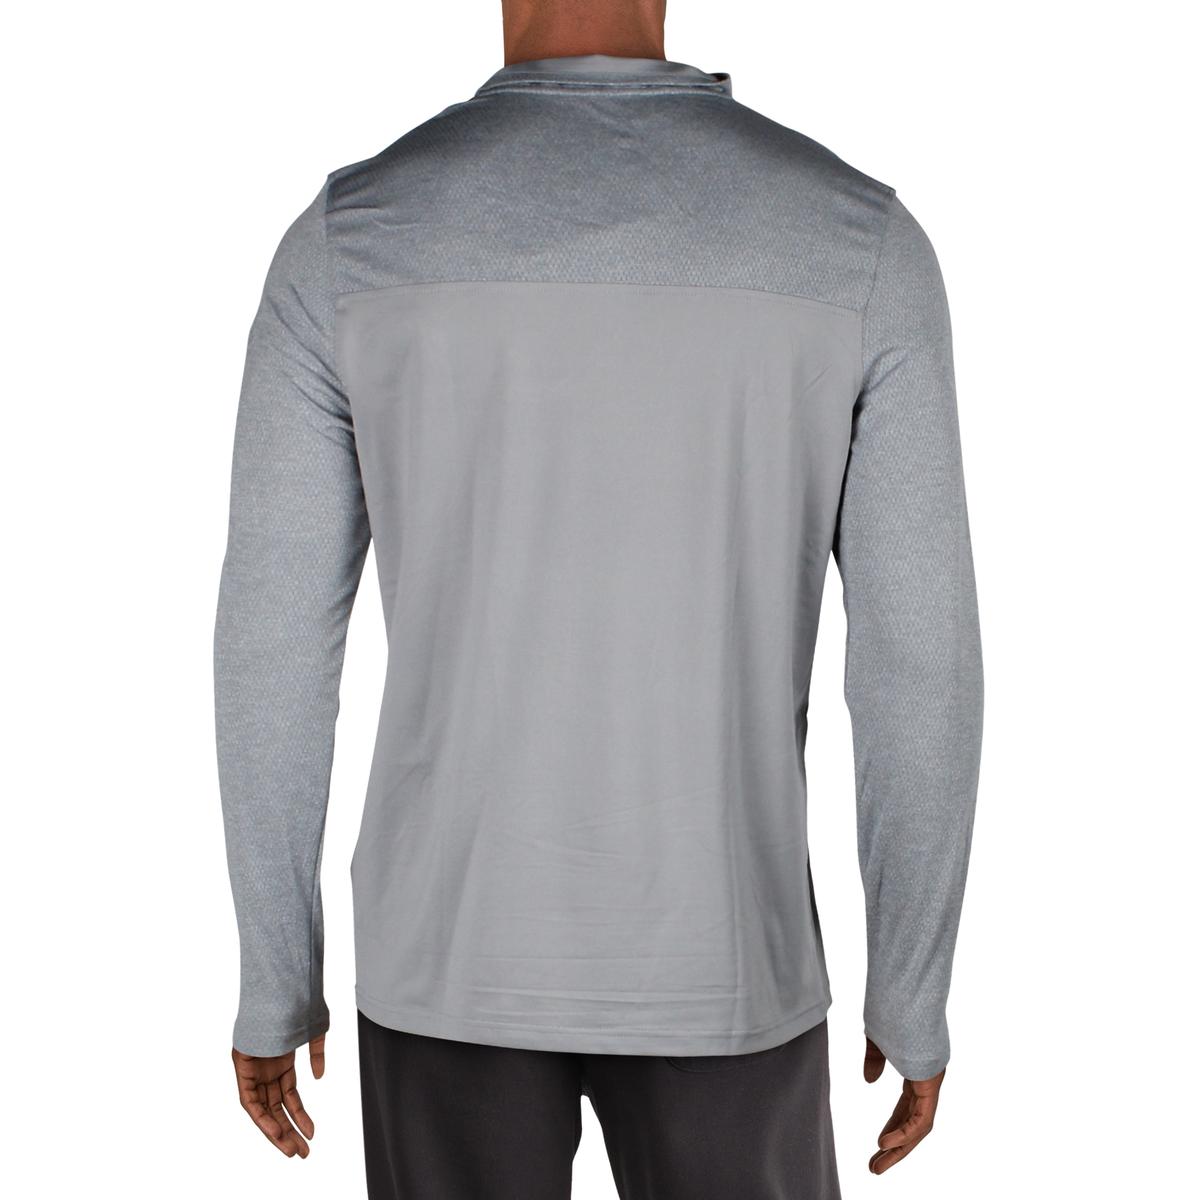 Under Armour Mens Fitness Workout 1/4 Zip Pullover